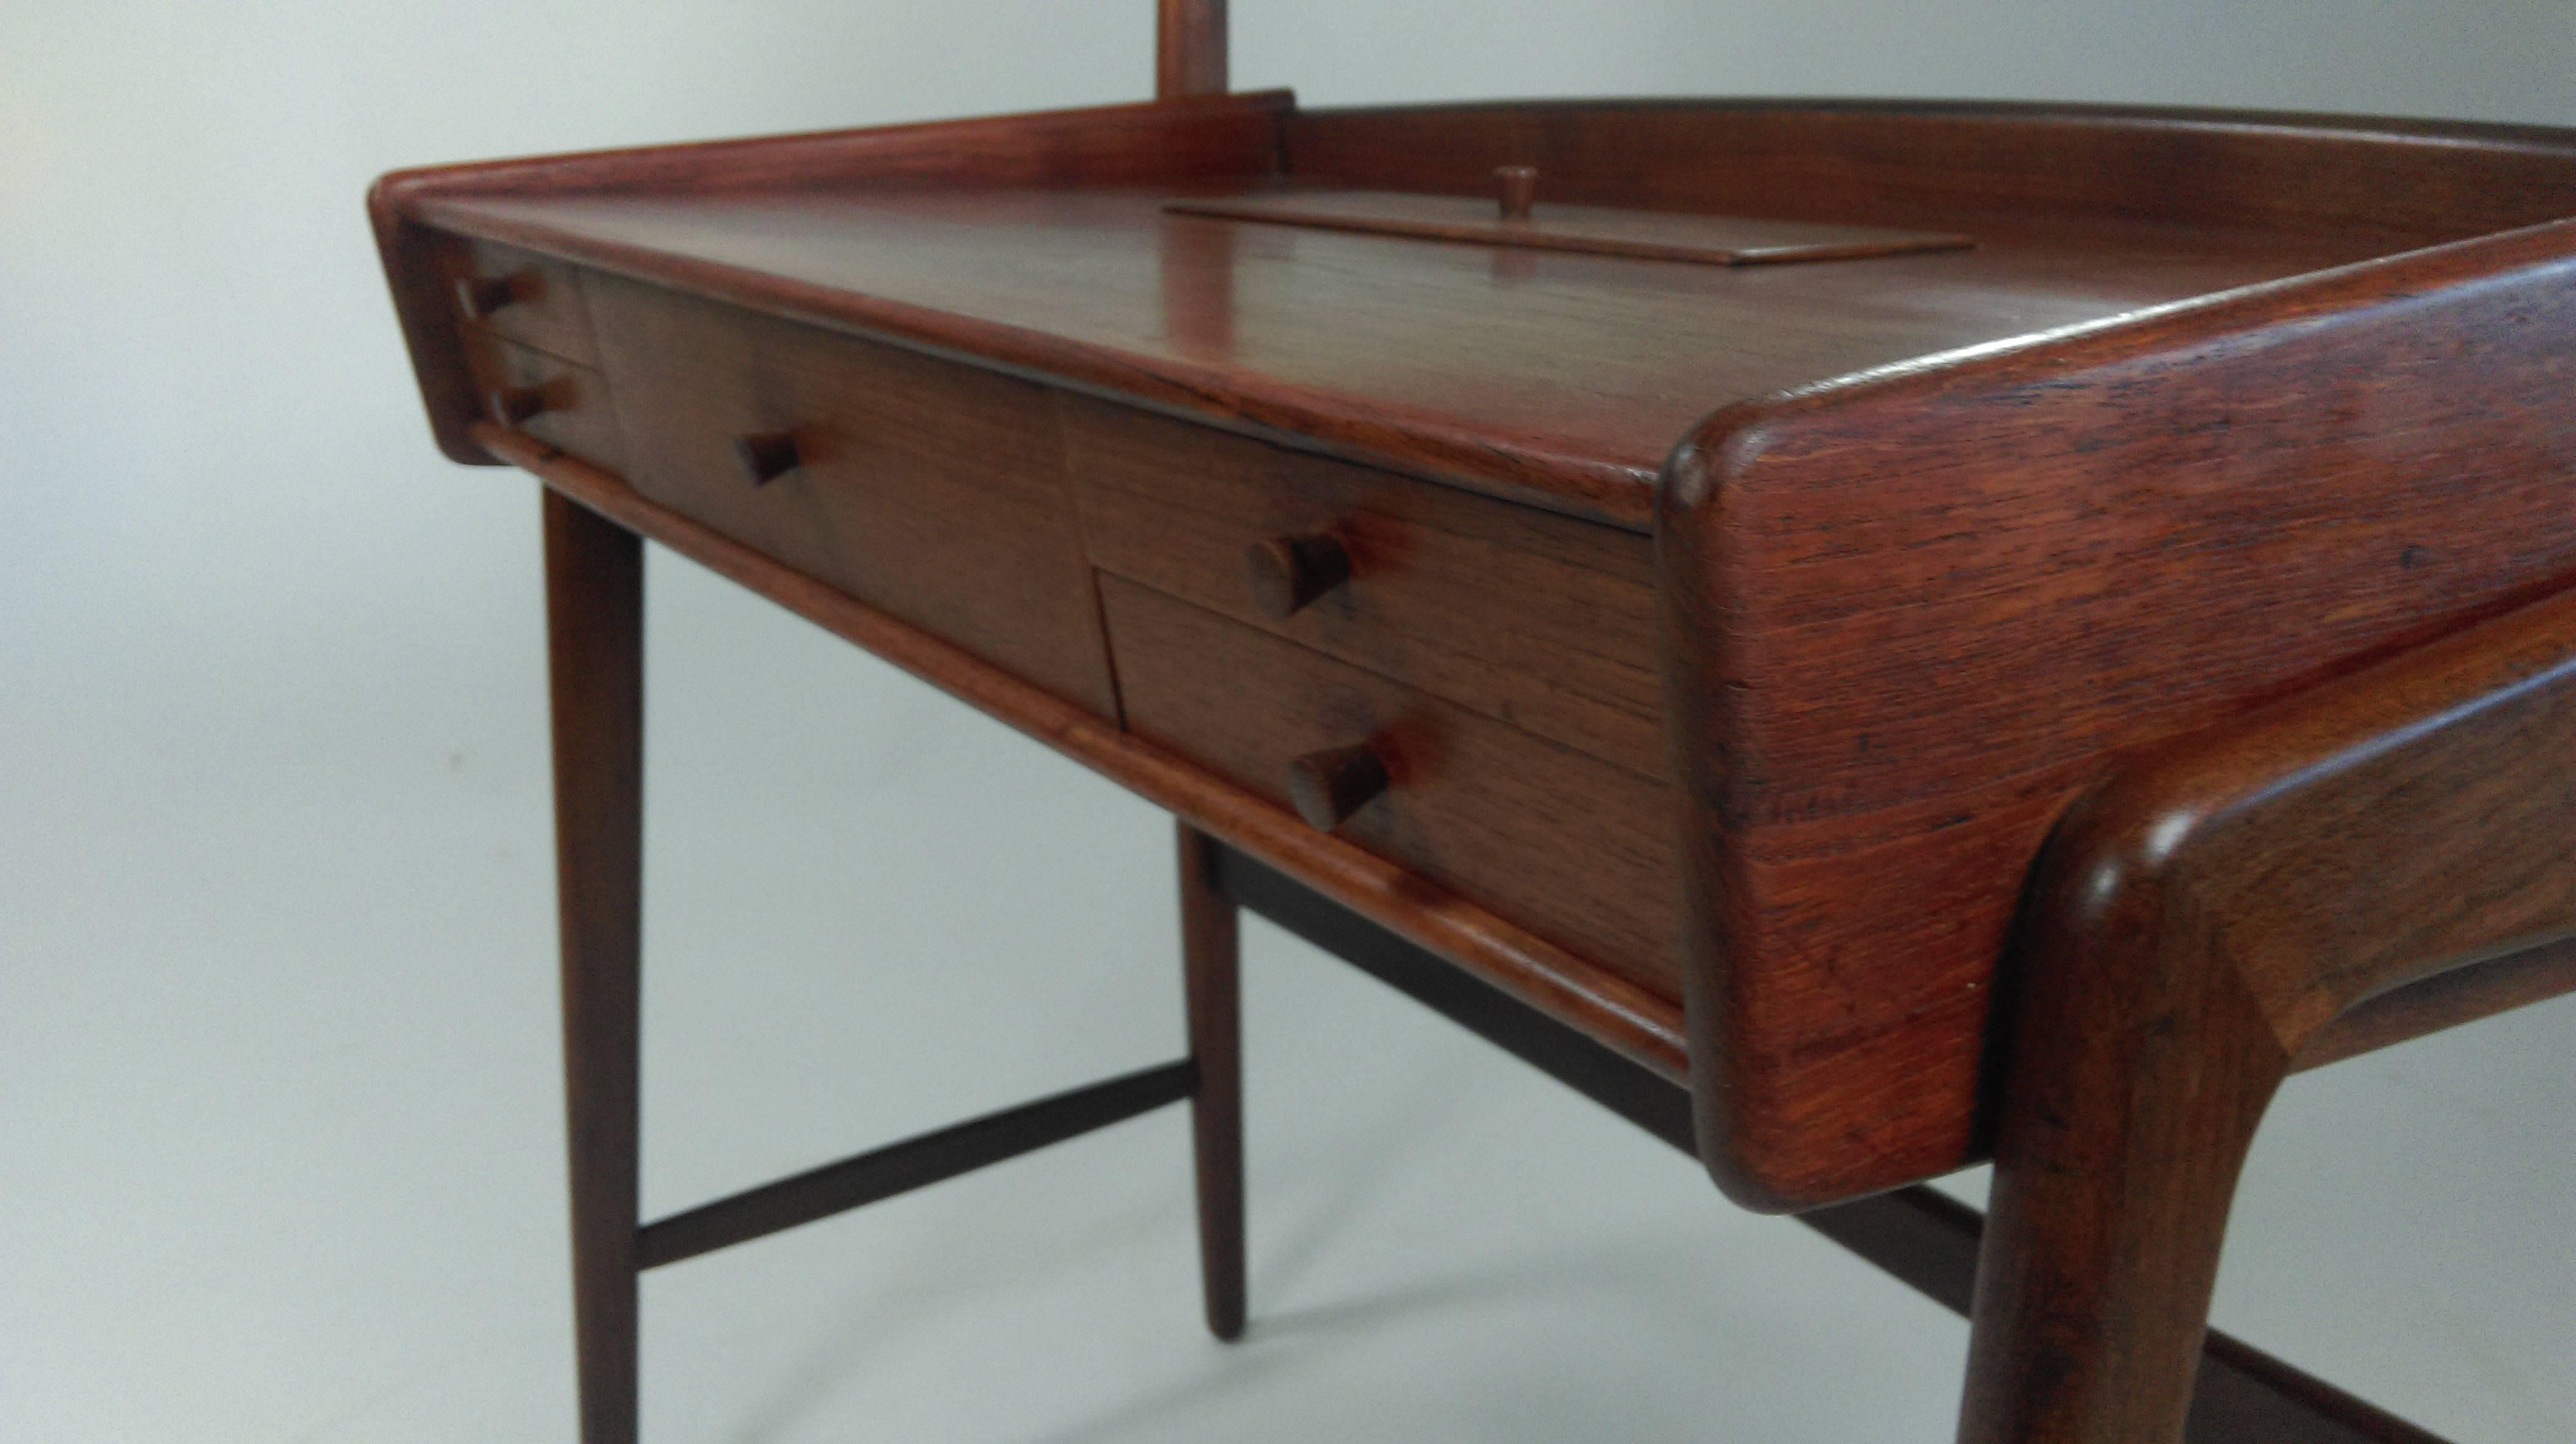 Well crafted Danish vanity or dressing table in teak from the 1960´s with small drawers for your vanity accessories. Designed by Svend Aage Madsen.

The table has been overlooked and refinished by cabinetmaker and is in good condition.